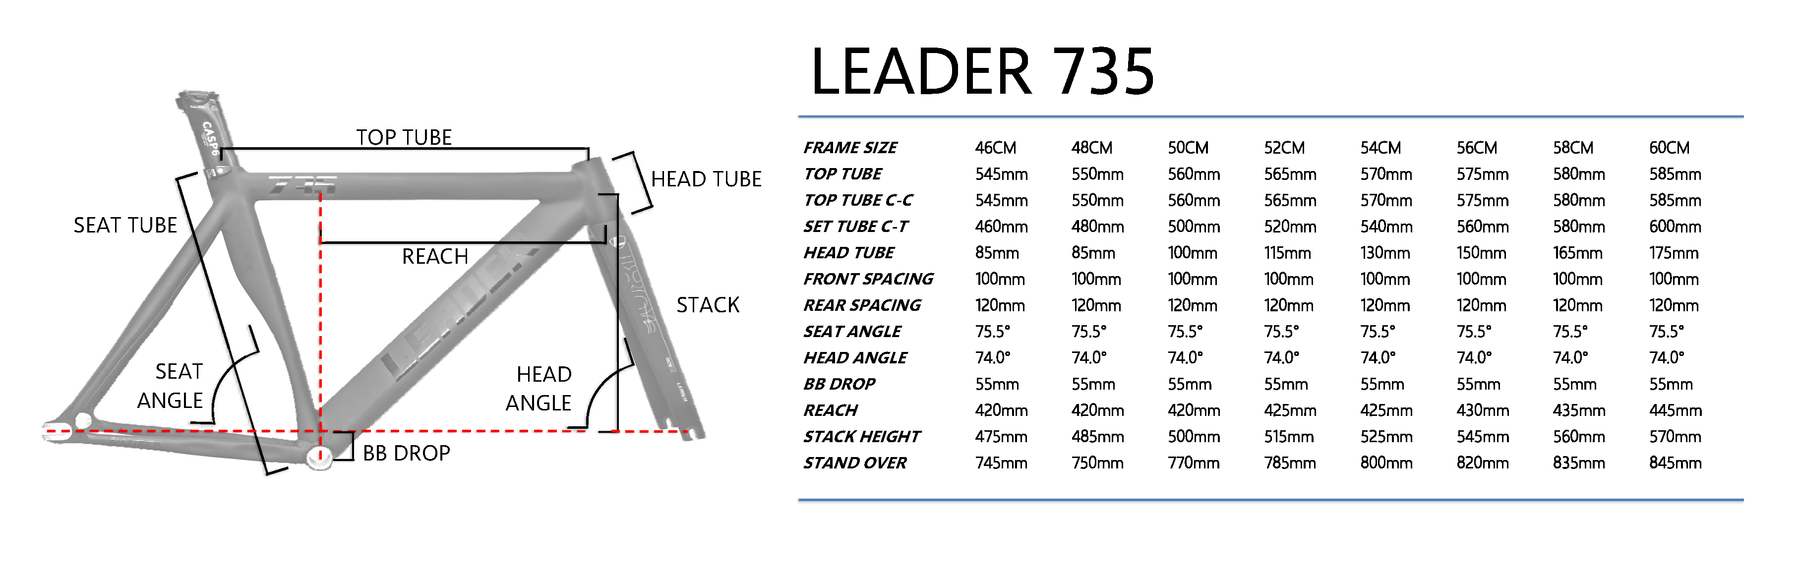 2021 LEADER 735 with Carbon Aero Seat Post – LEADER BIKES